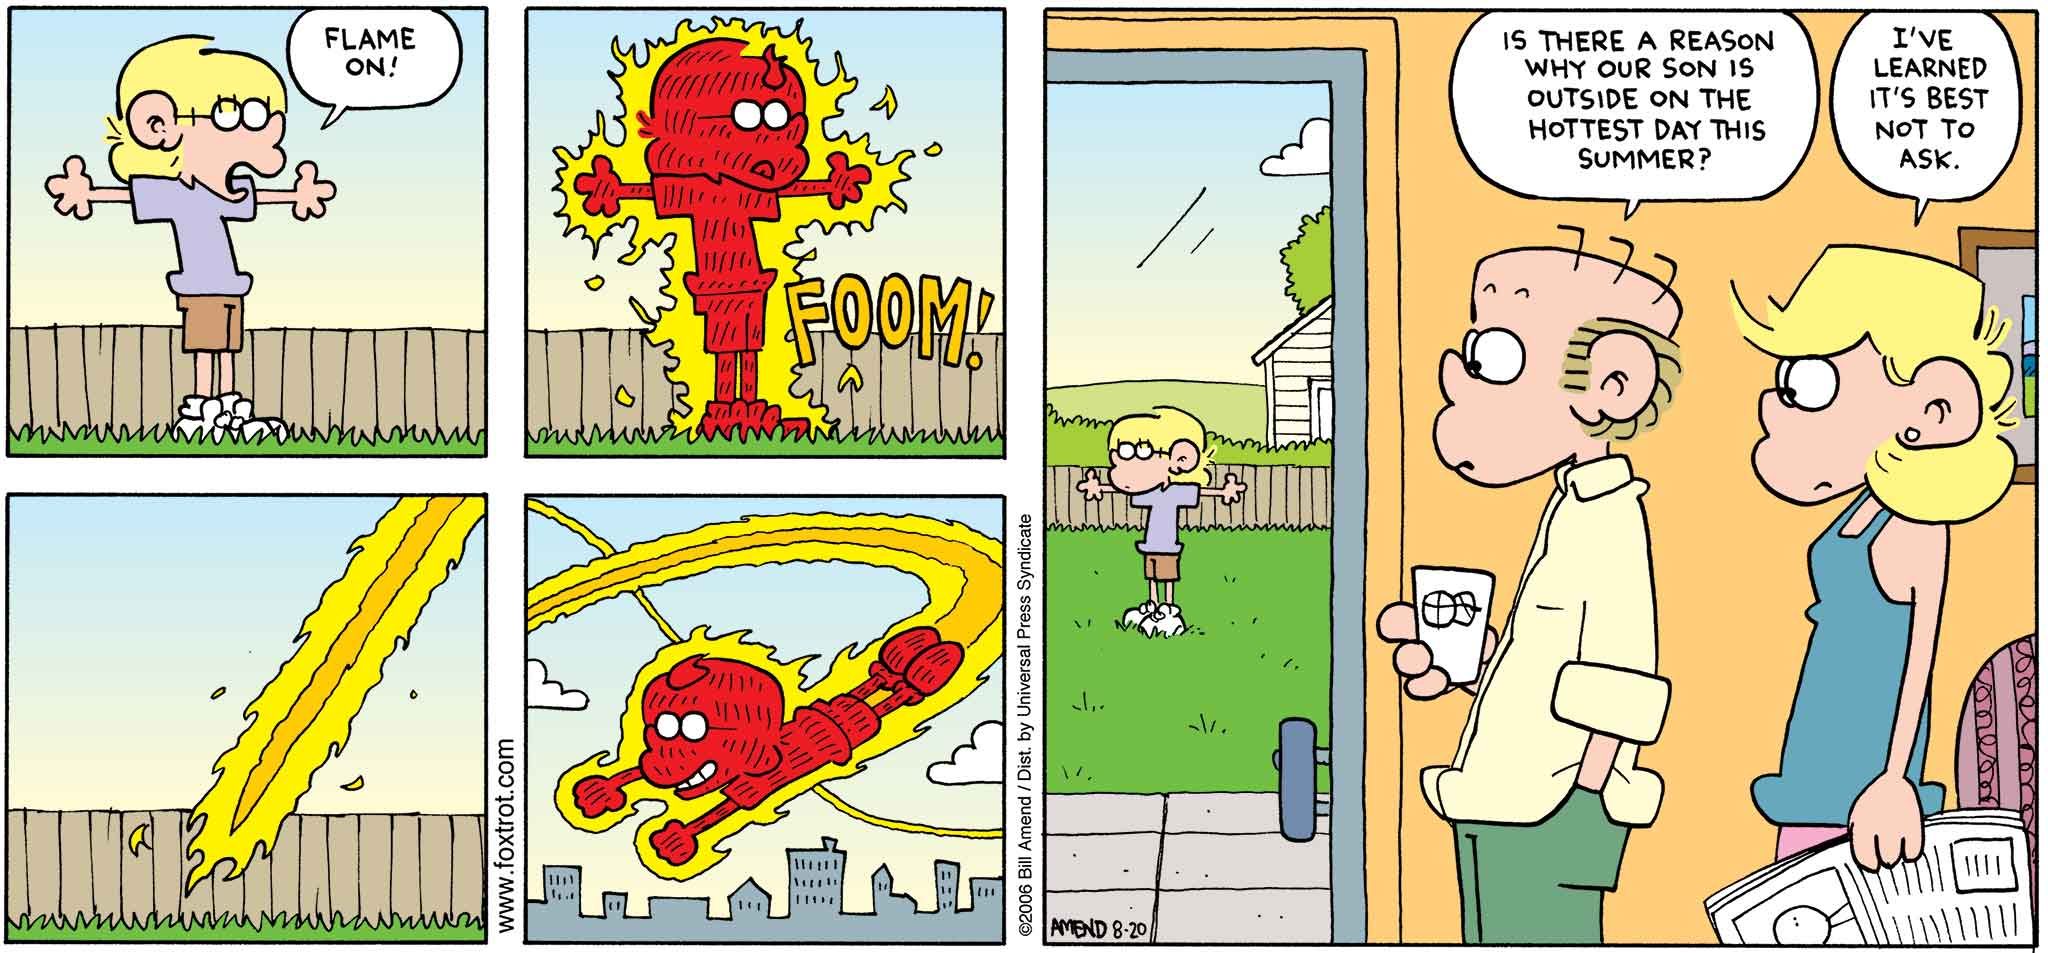 FoxTrot by Bill Amend August 20, 2006 - Summer Comics - Roger: Is there a reason why our son is outside on the hottest day this summer? Andy: I've learned it's best not to ask.